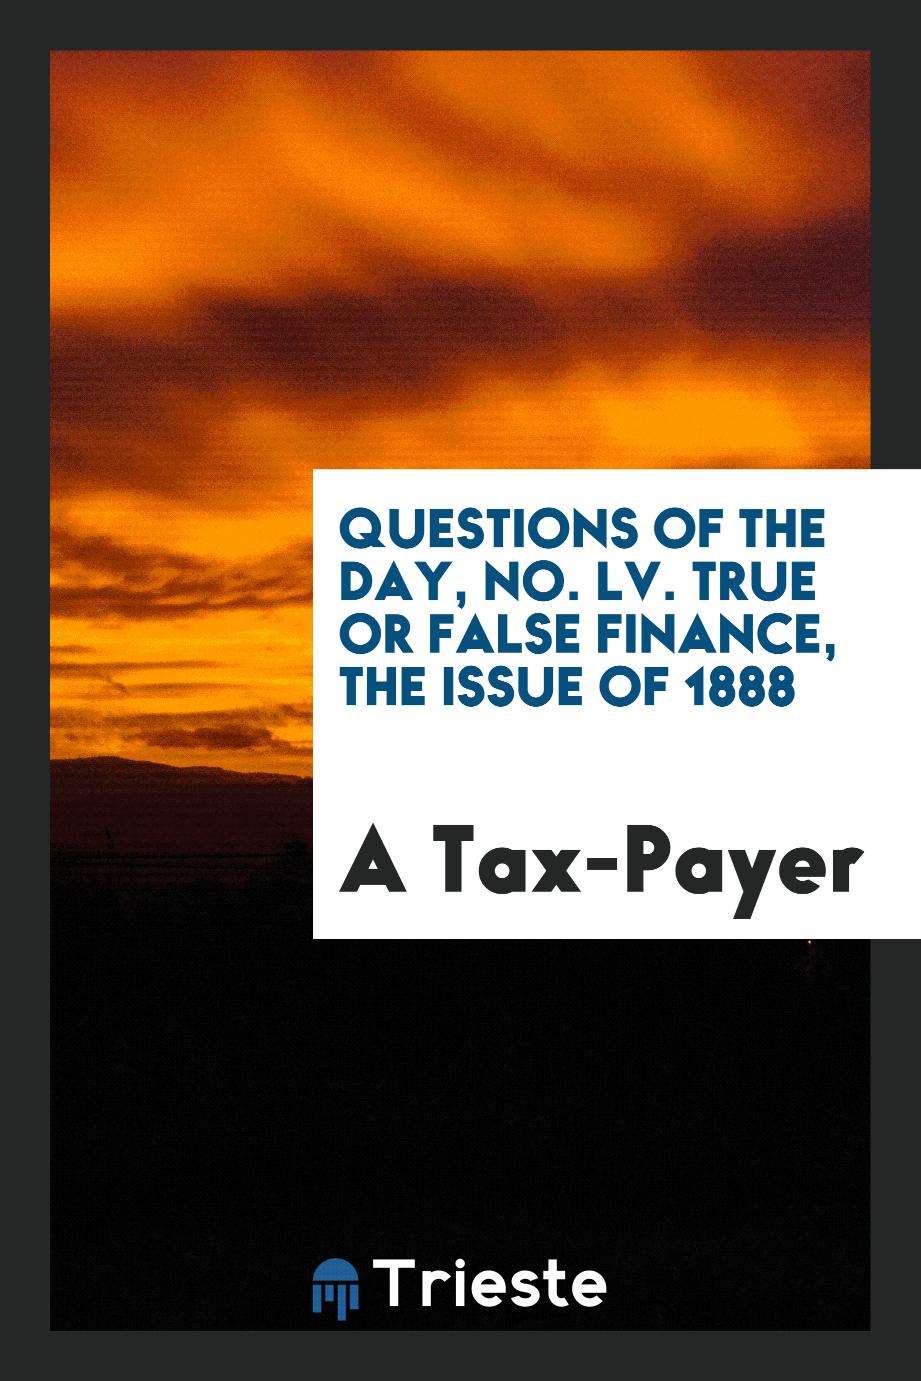 Questions of the Day, No. LV. True or false finance, the issue of 1888